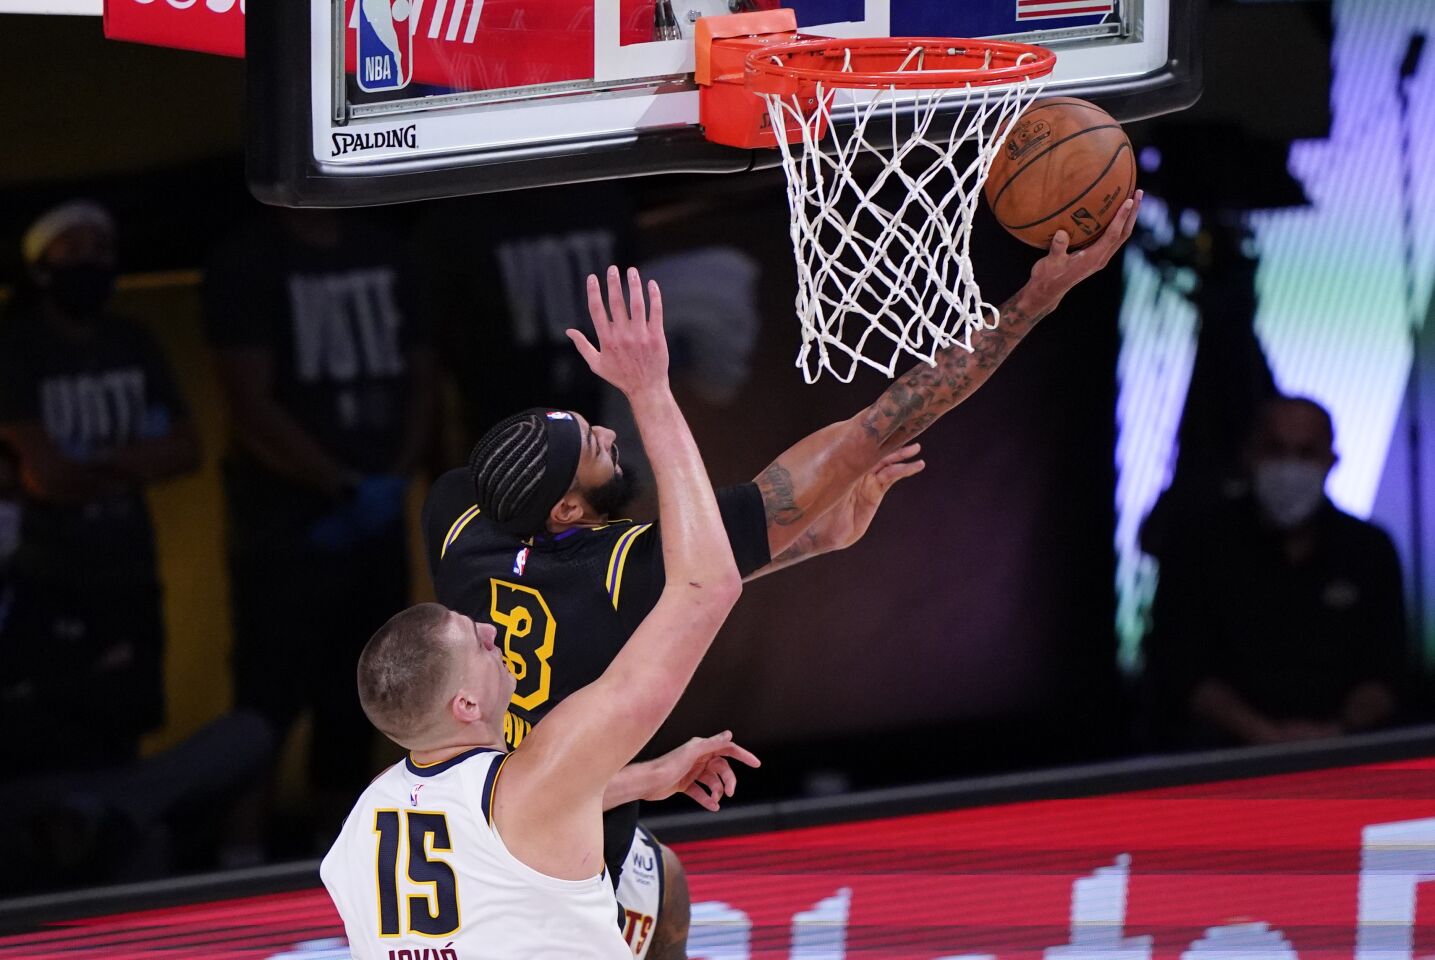 Lakers forward Anthony Davis attempts a reverse layup against Nuggets center Nikola Jokic during Game 2.